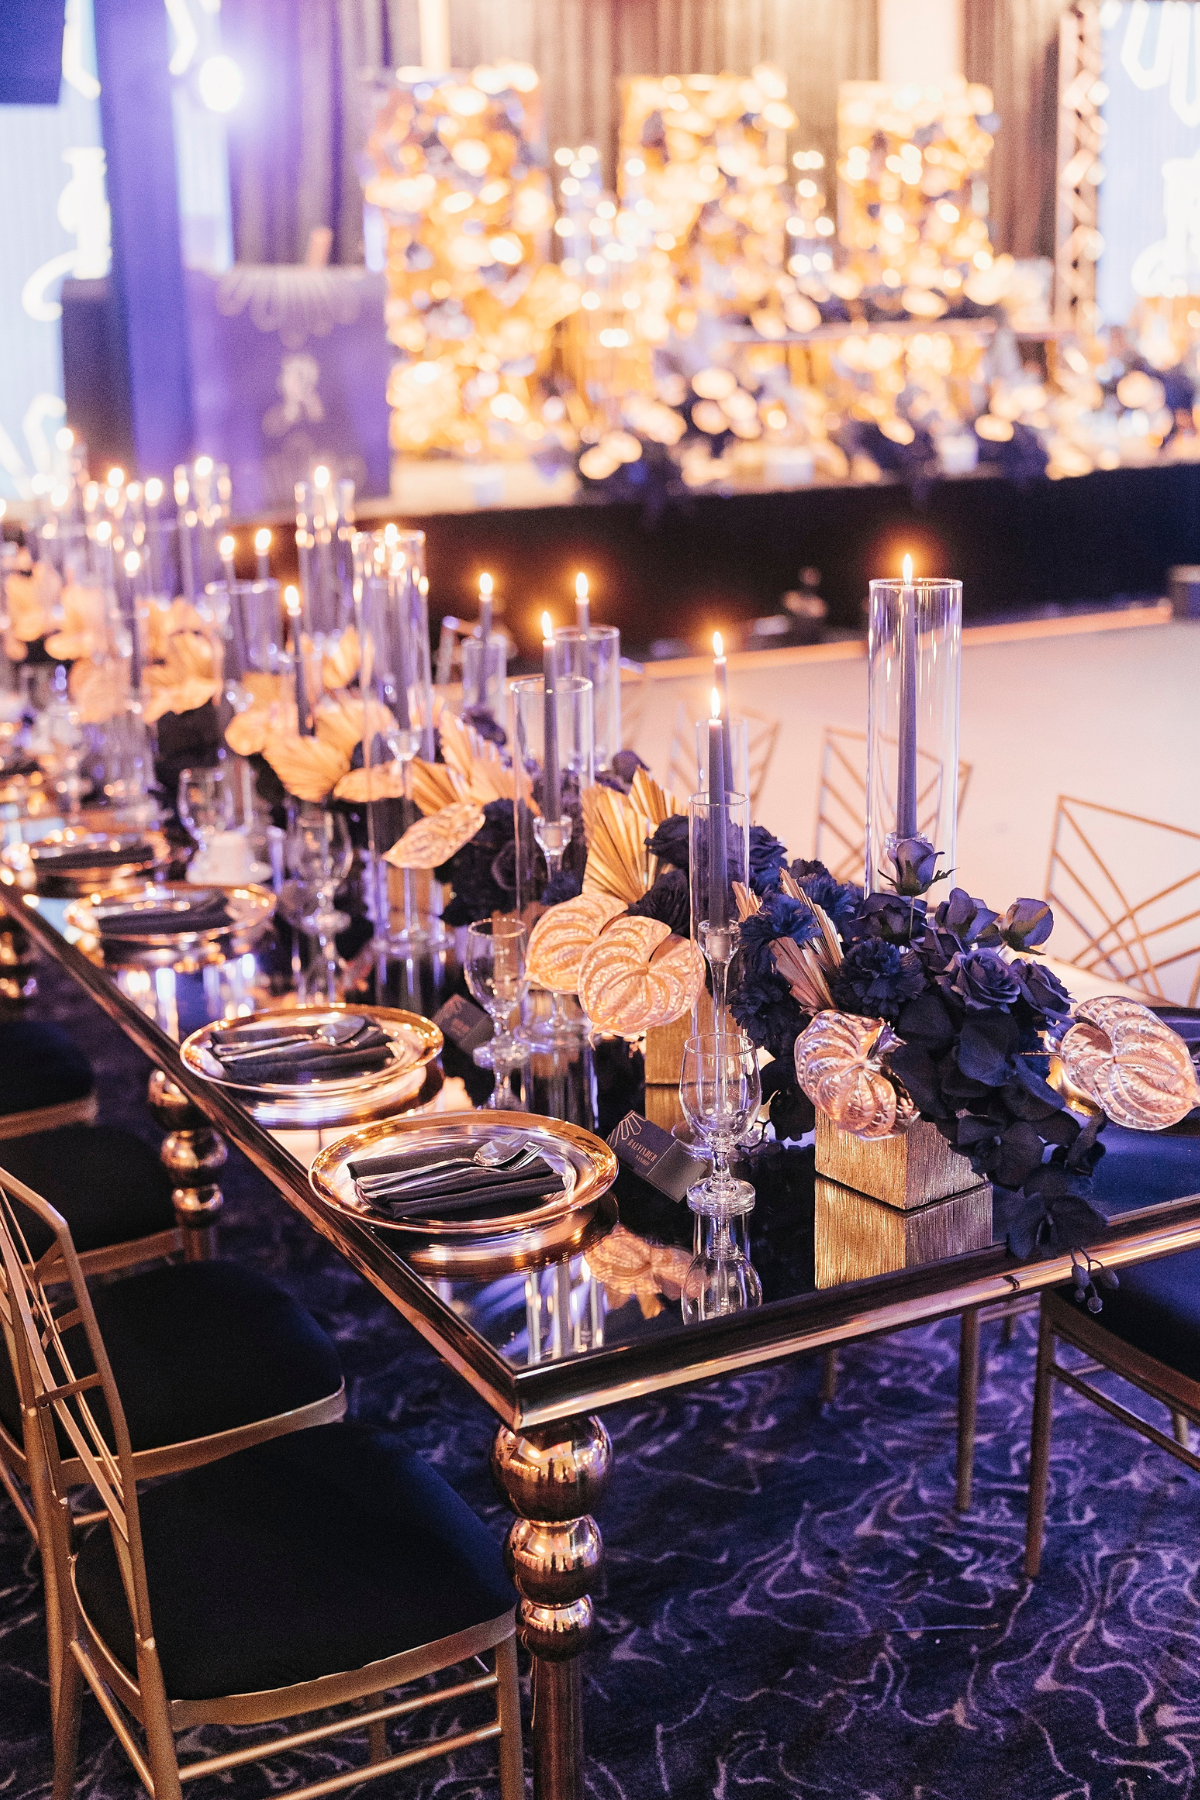 kavita-mohan-navy-gold-wedding-reception-art-deco-tablescape-charger-candles-fanfare-chair